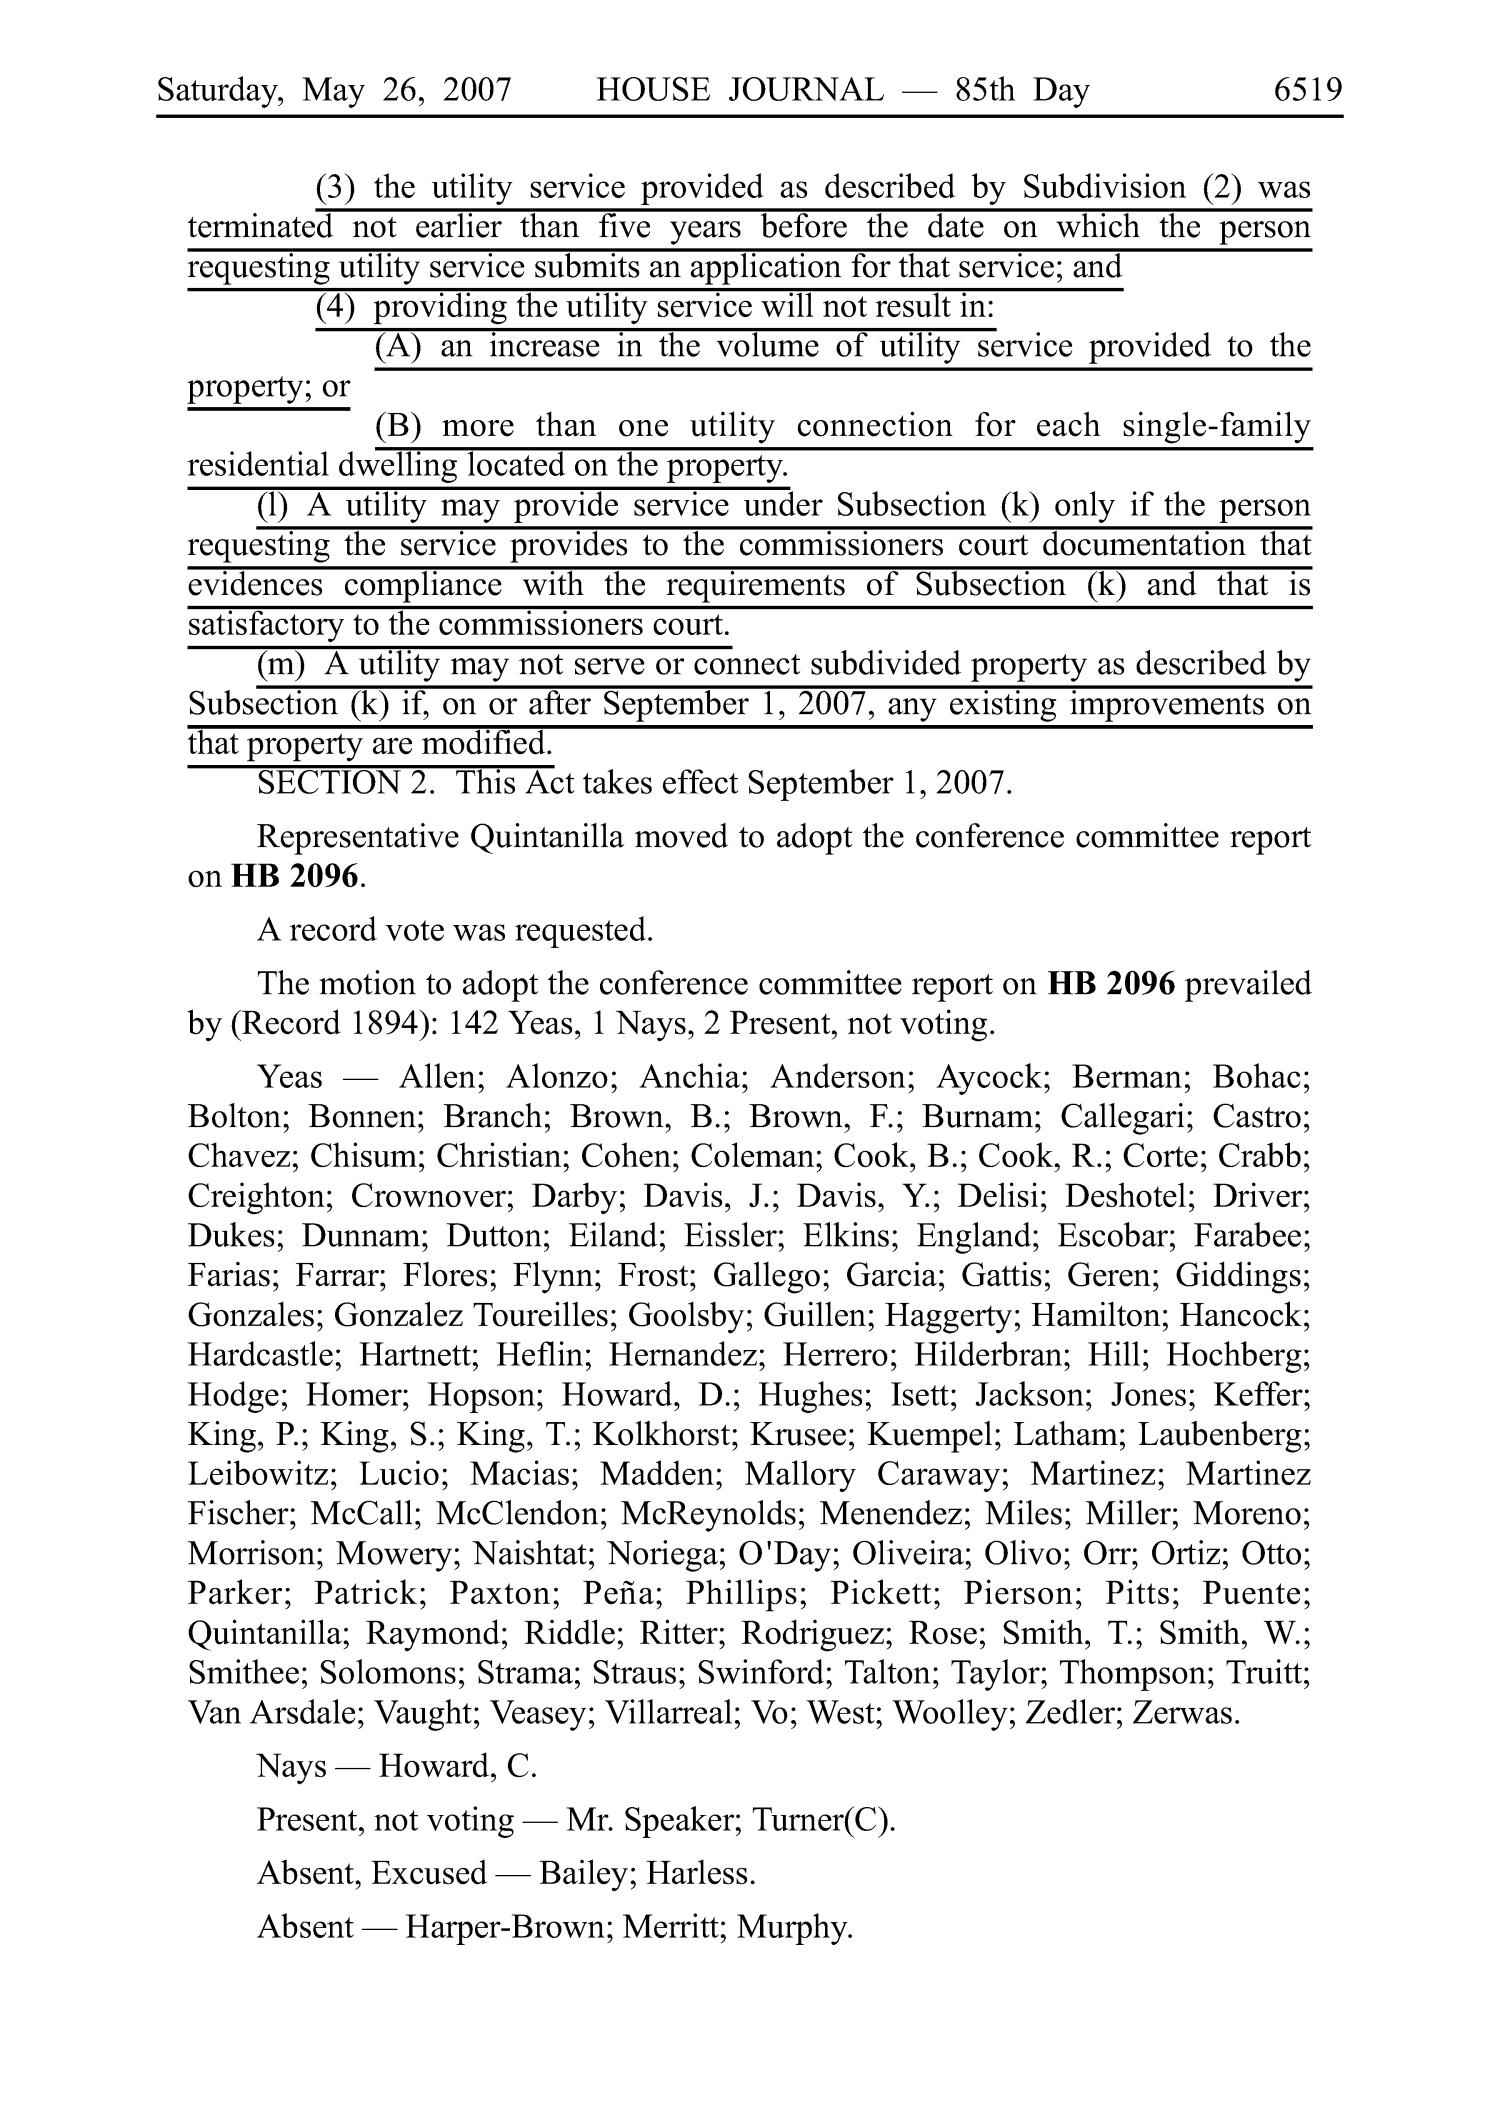 Journal of the House of Representatives of the Regular Session of the Eightieth Legislature of the State of Texas, Volume 6
                                                
                                                    6519
                                                